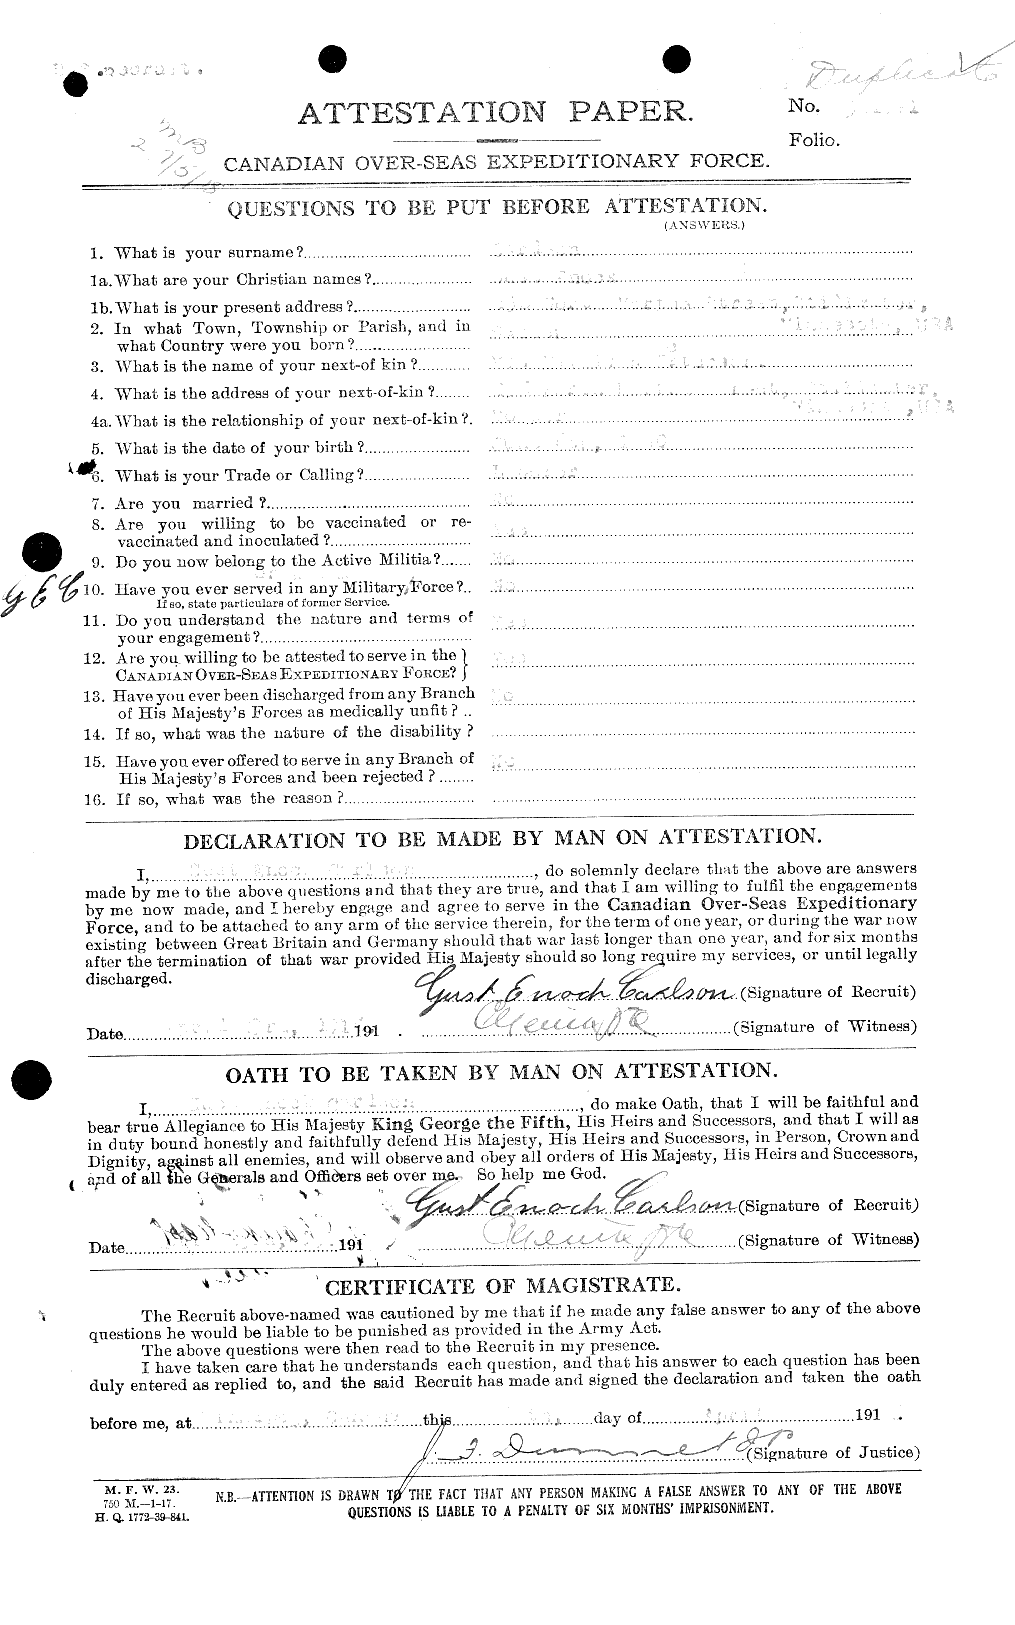 Personnel Records of the First World War - CEF 004548a